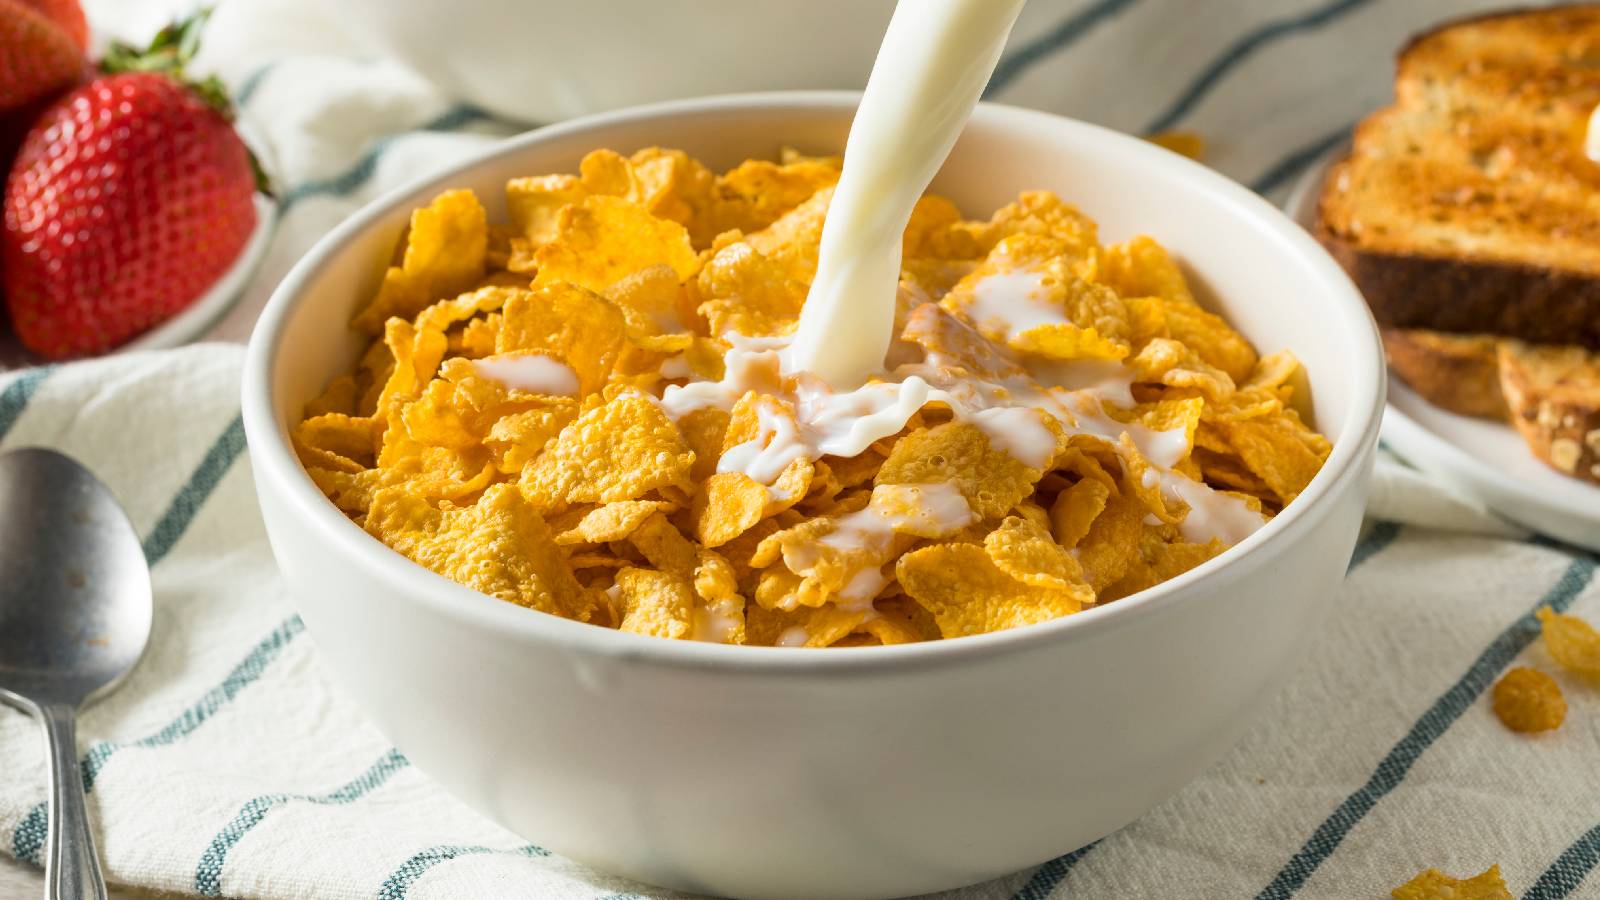 Corn Flakes Recipe and Nutrition - Eat This Much